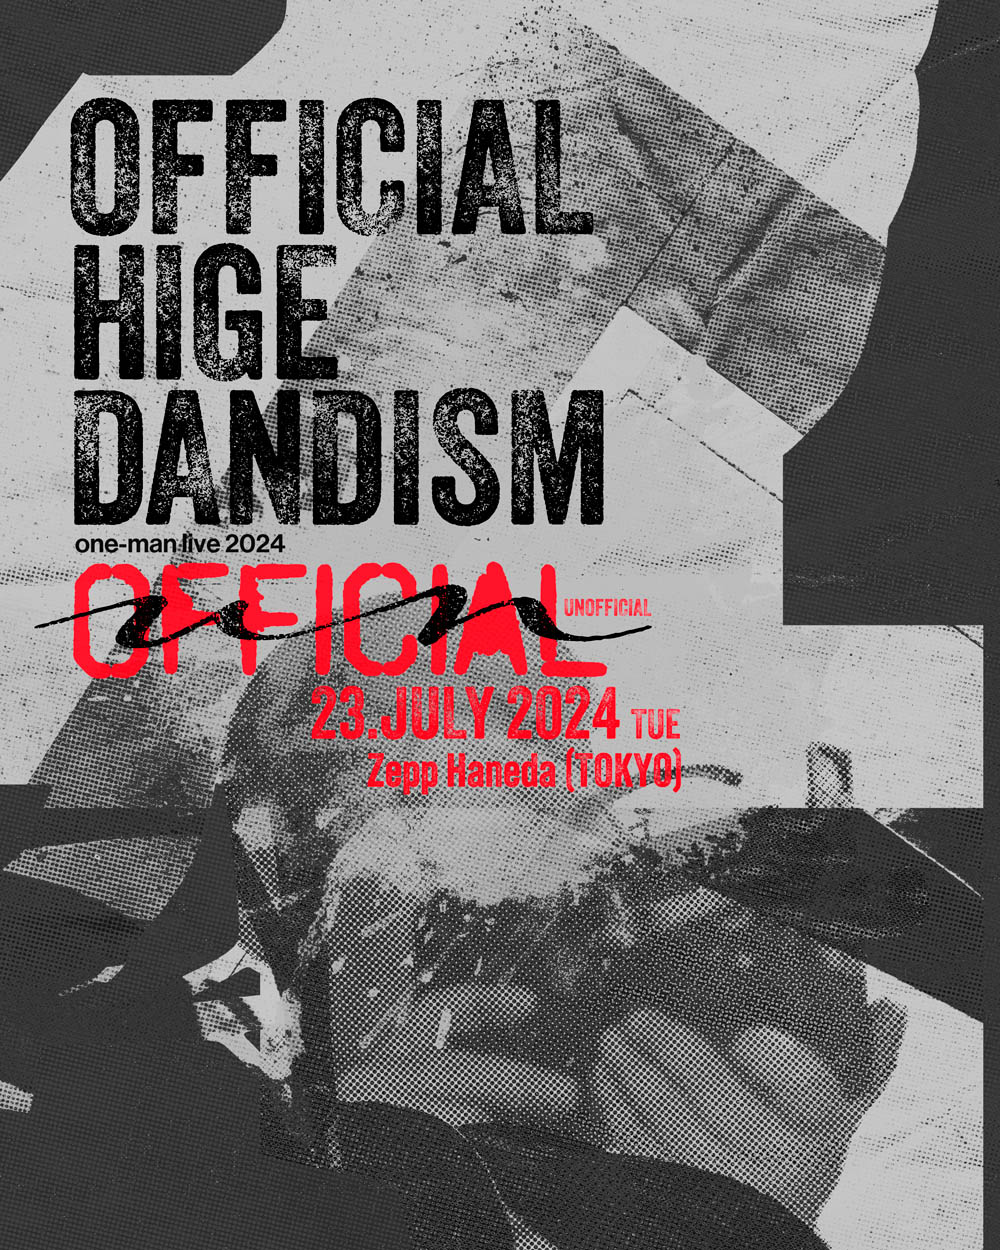 Official髭男dism one-man live 2024 -UNOFFICIAL-